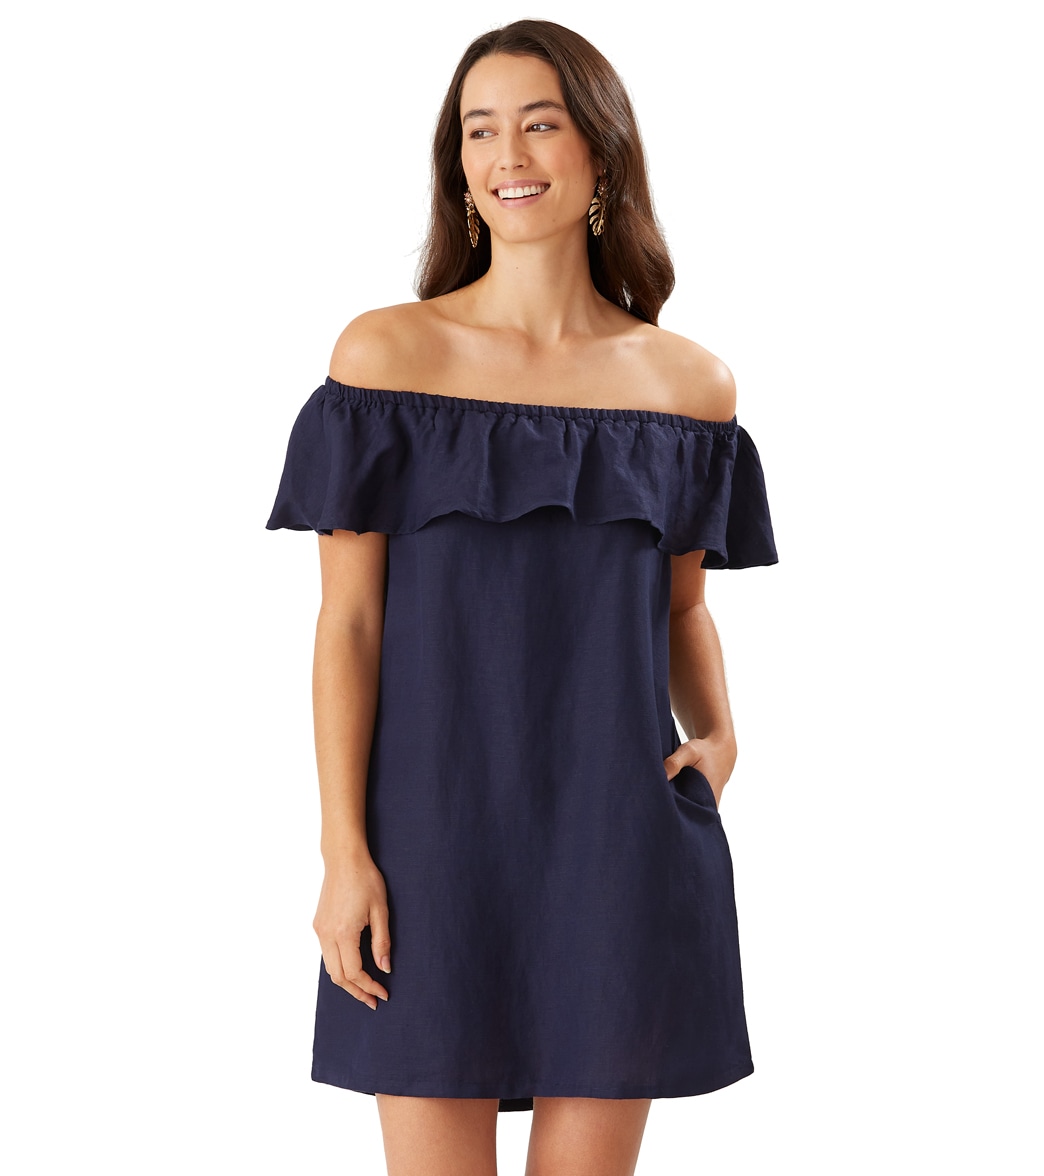 Tommy Bahama Women's St Lucia Off The Shoulder Cover Up Dress - Mare Navy Large - Swimoutlet.com